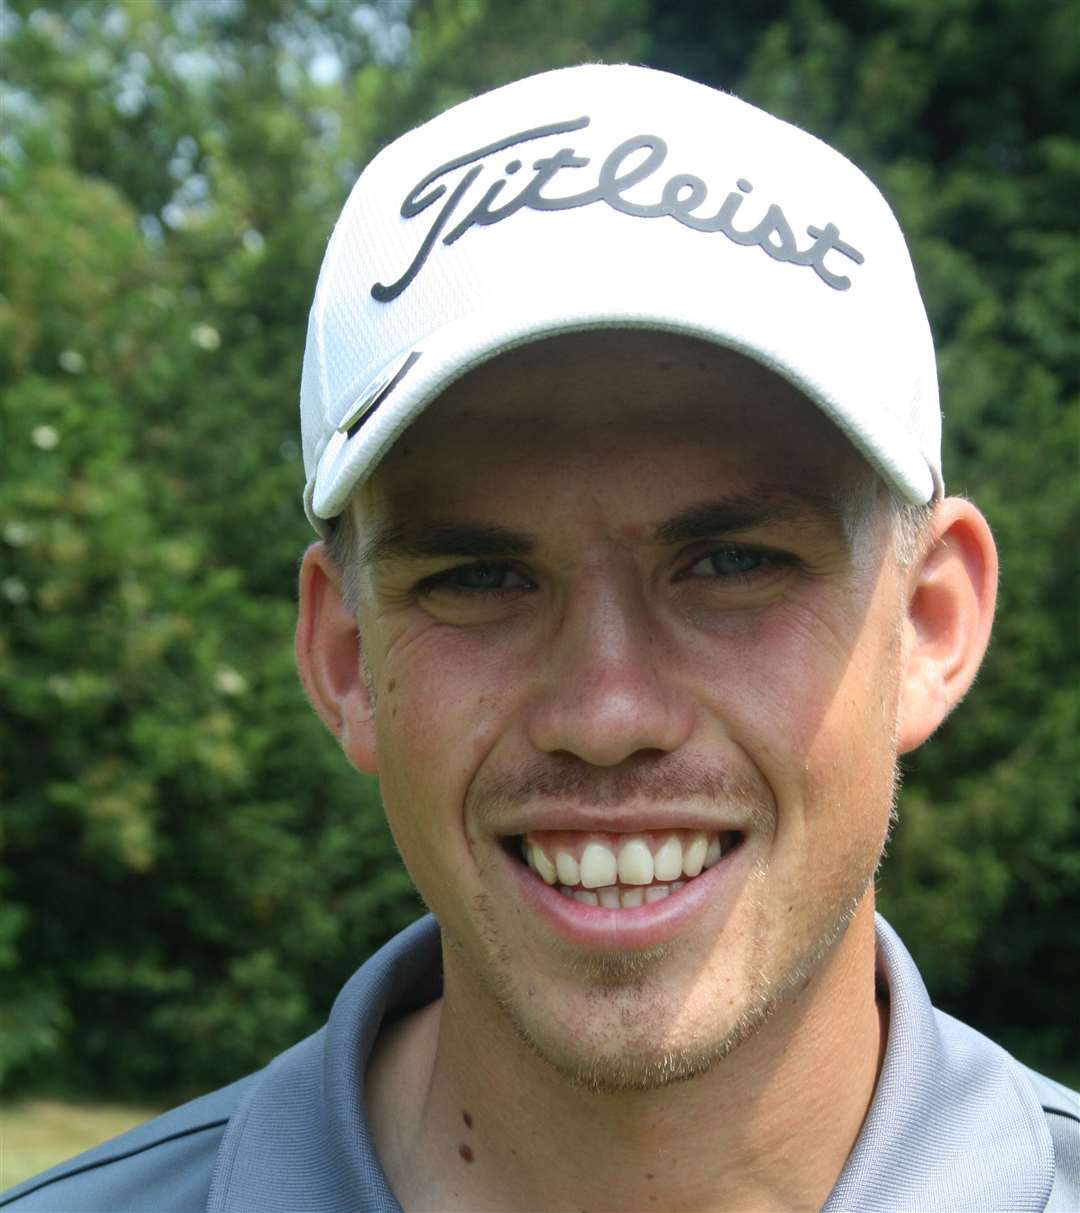 Canterbury Golf Club's Josh Bristow took part in the Amateur Championship at Royal Birkdale